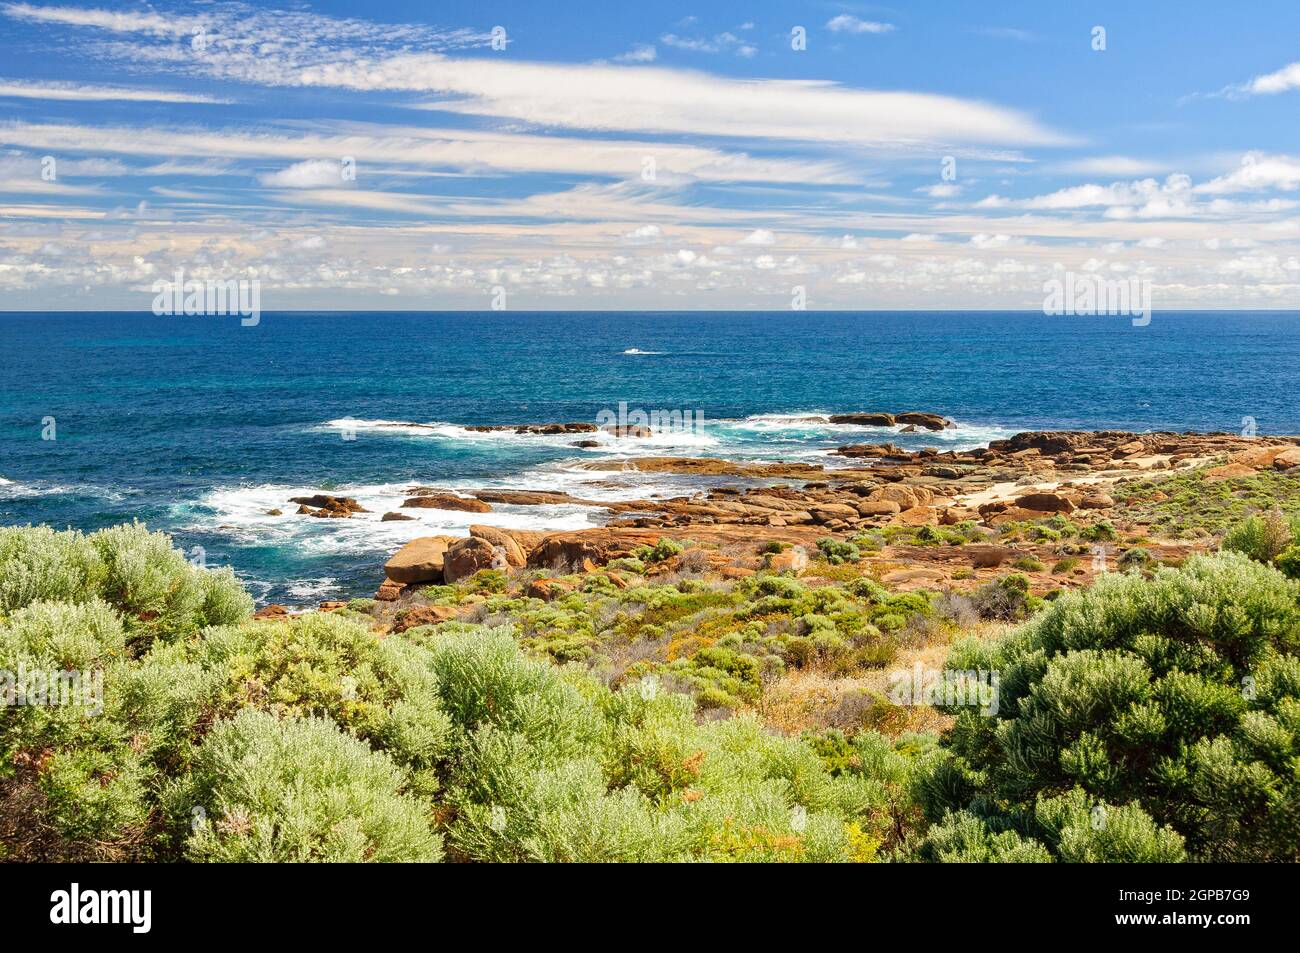 Cape Leeuwin, the most south-westerly point of Australia, is where the powerful Indian and Southern Oceans converge - Augusta, WA, Australia Stock Photo